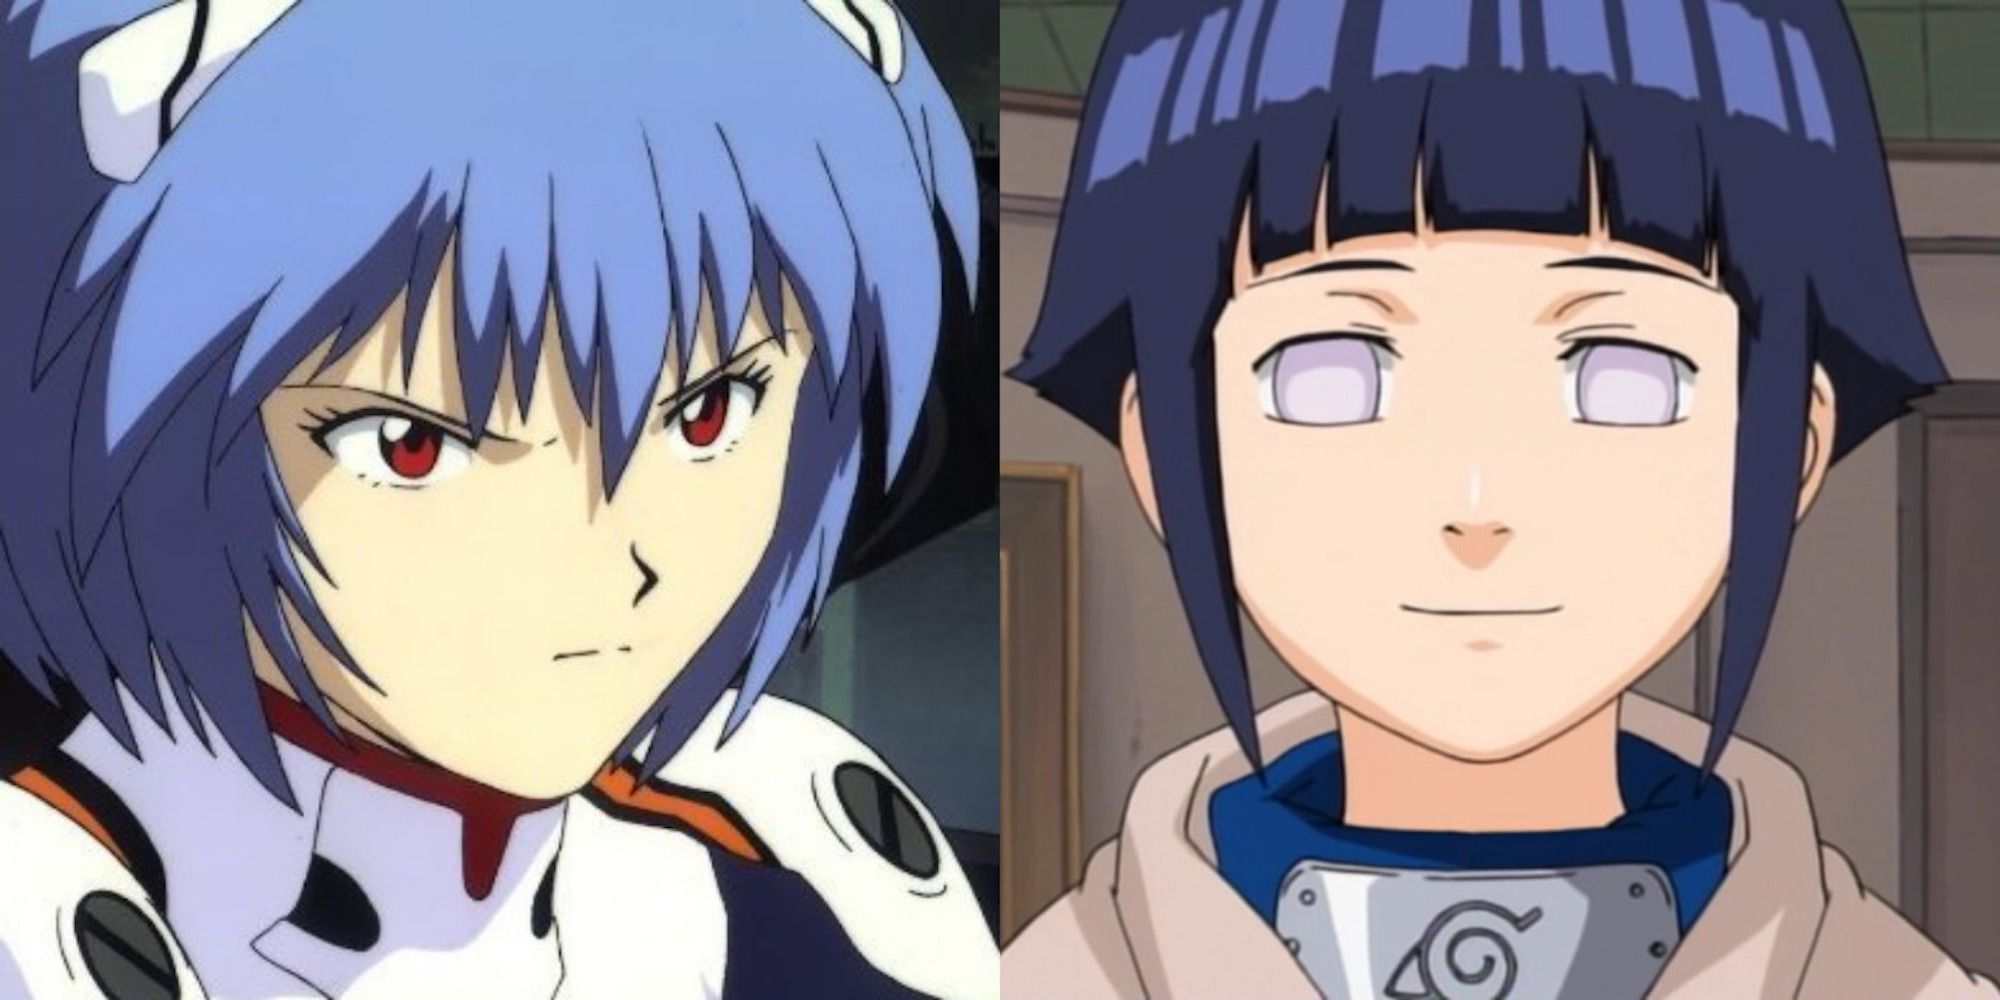 Rei from Neon Genesis Evangelion and Hinata from Naruto